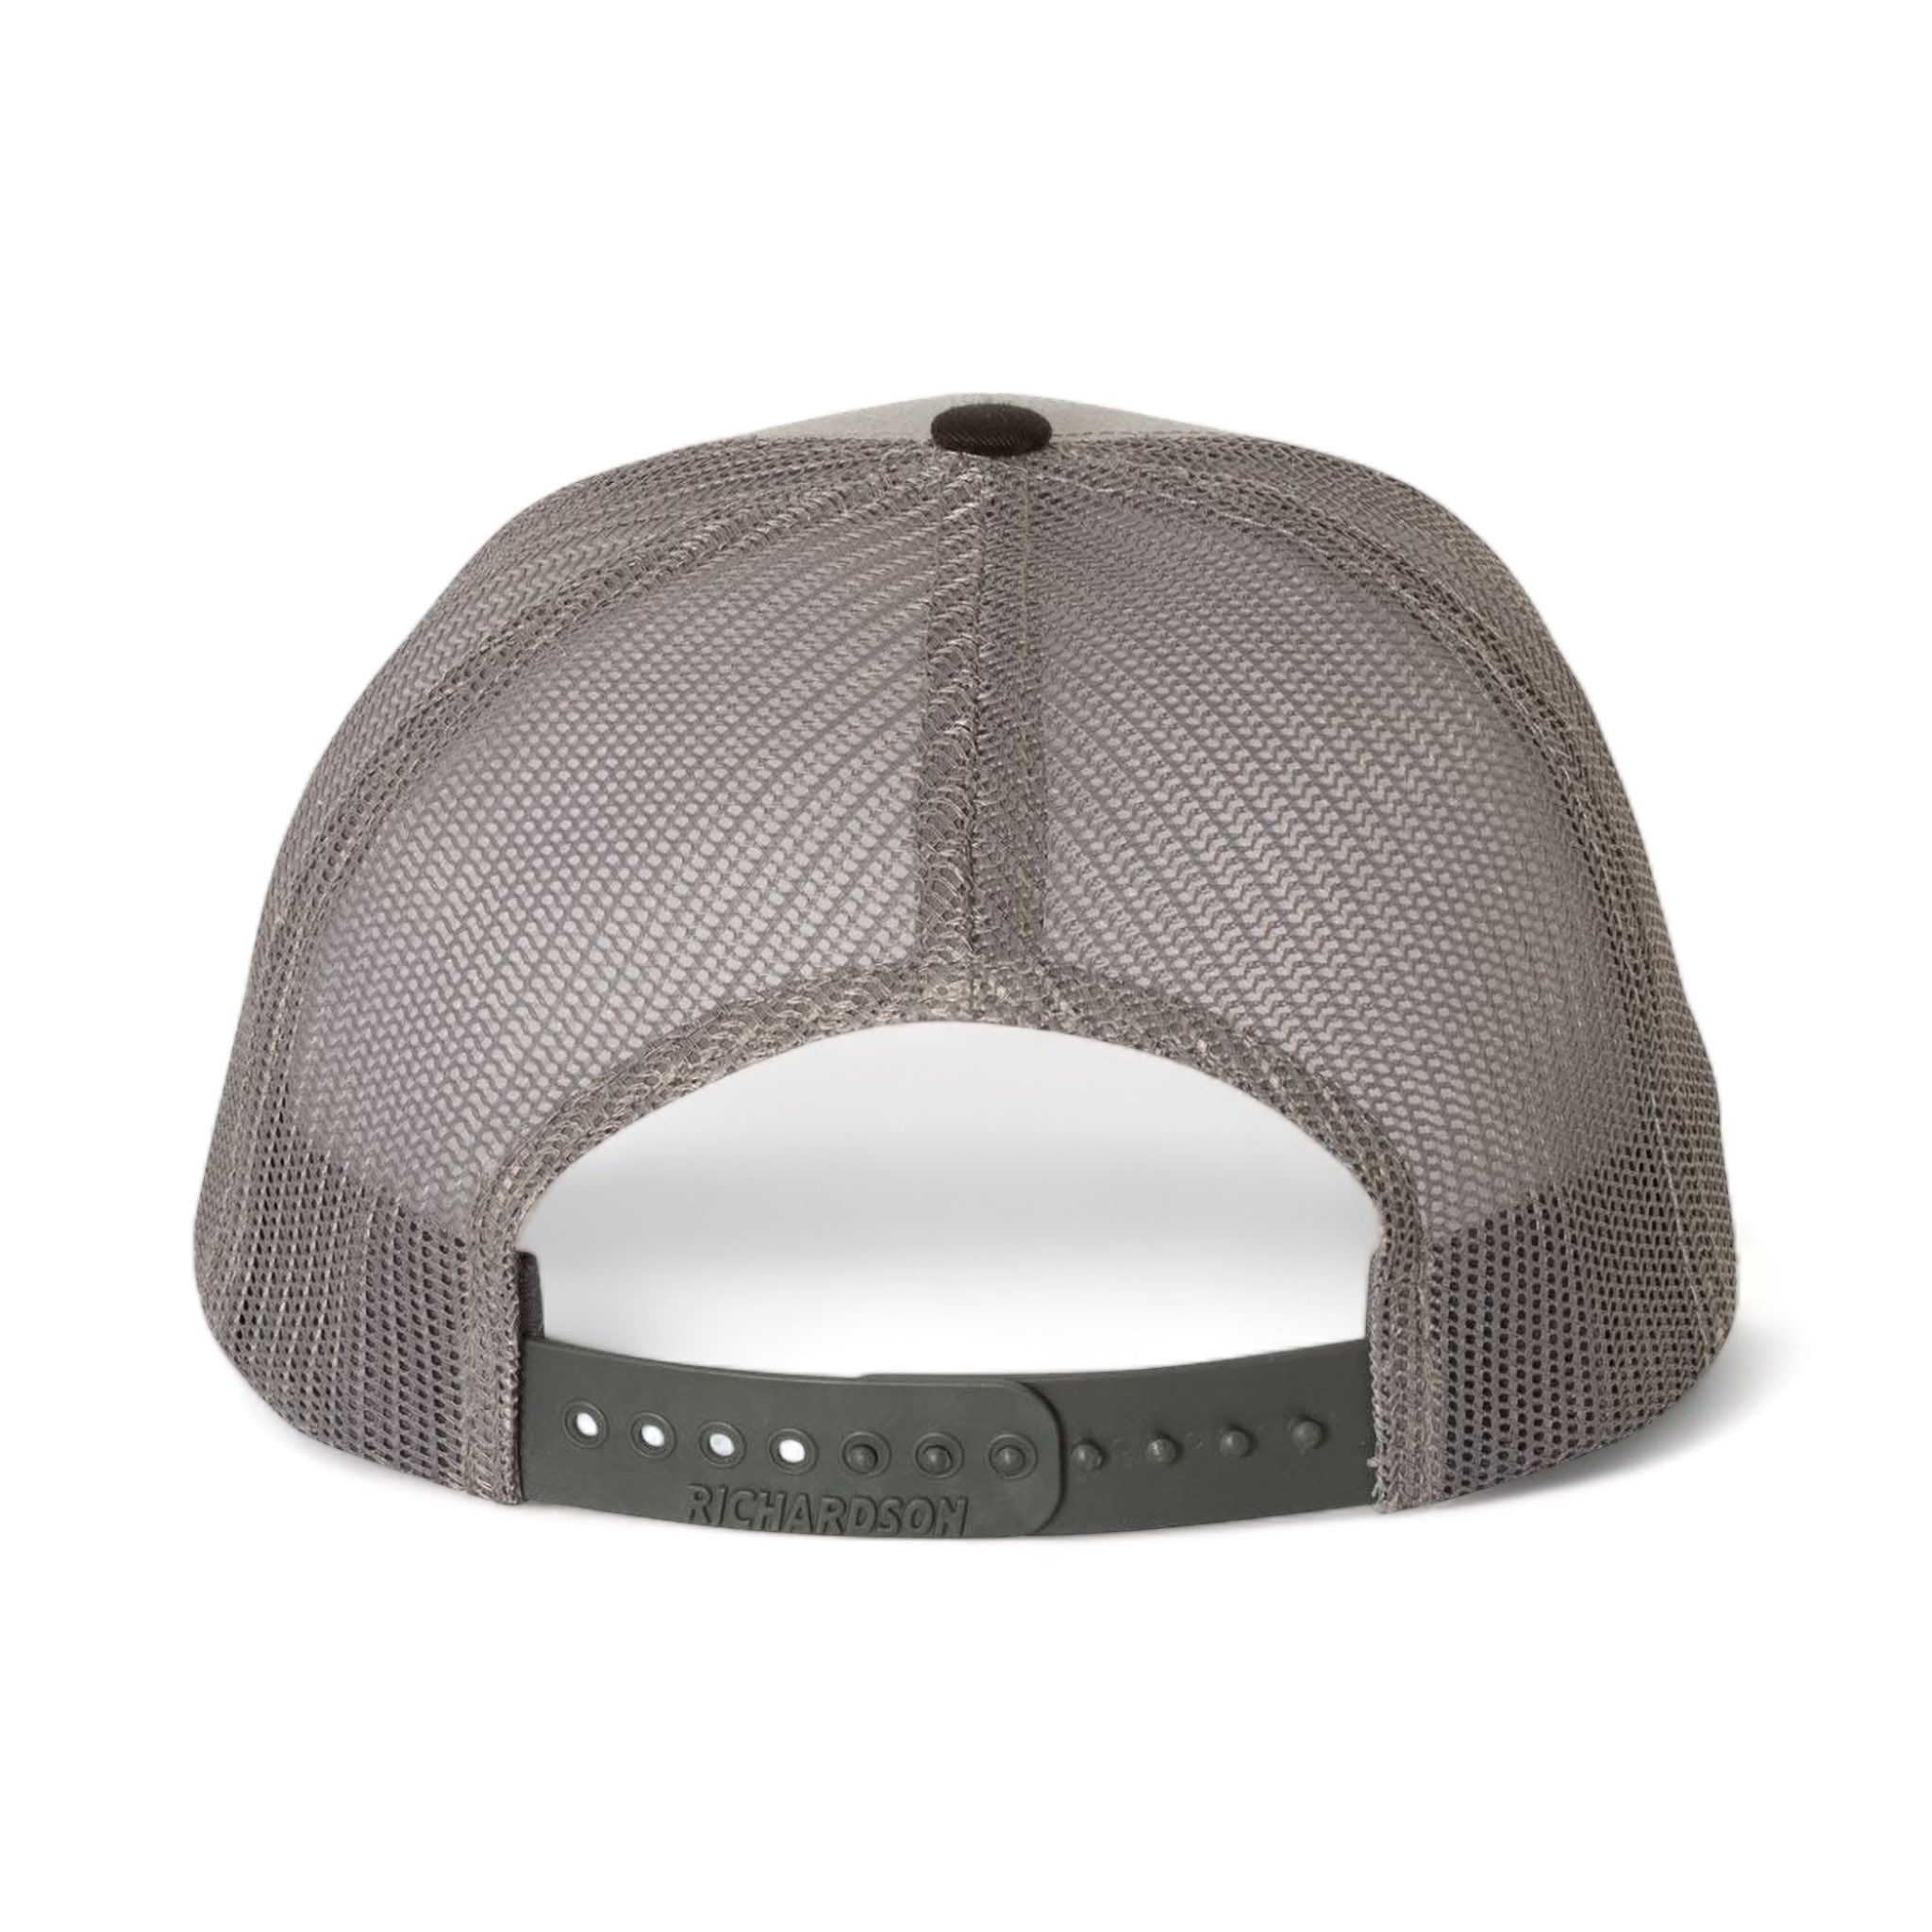 Back view of Richardson 112 custom hat in grey, charcoal and black